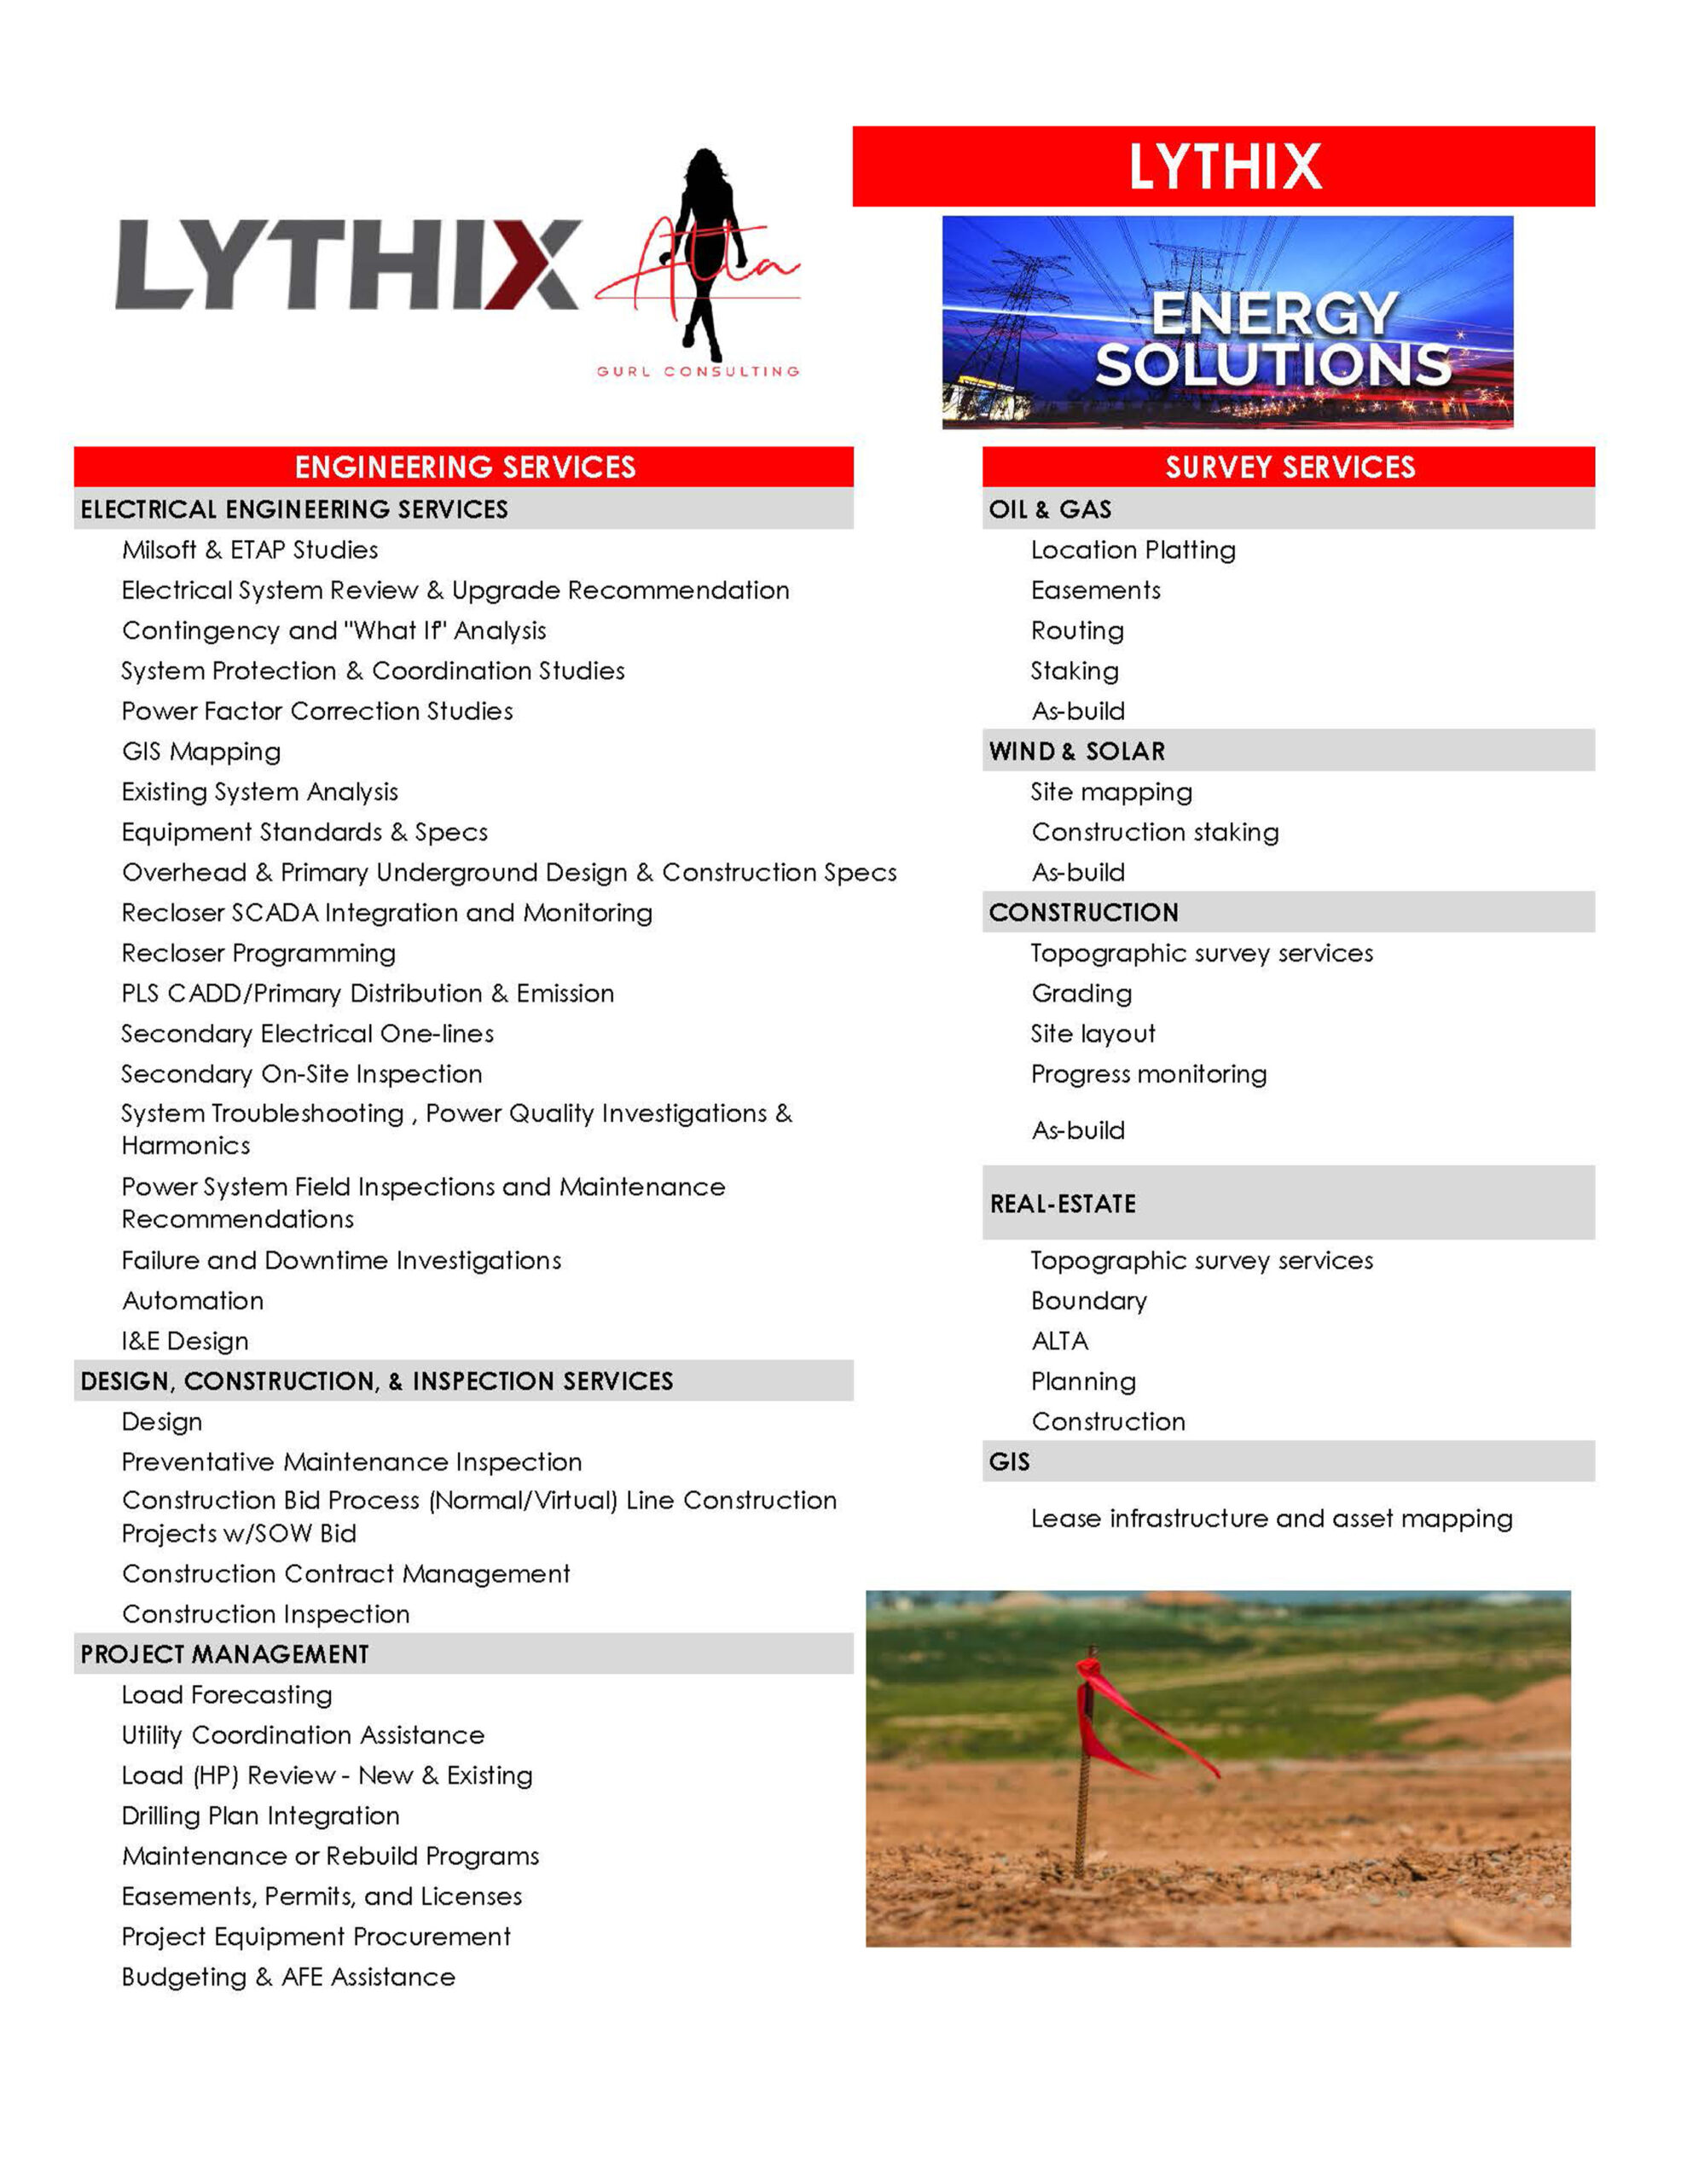 Lythix Survey Services ELECTRICAL ENGINEERING SERVICES Milsoft & ETAP Studies Electrical System Review & Upgrade Recommendation Contingency and "What If" Analysis System Protection & Coordination Studies Power Factor Correction Studies GIS Mapping Existing System Analysis Equipment Standards & Specs Overhead & Primary Underground Design & Construction Specs Recloser SCADA Integration and Monitoring Recloser Programming PLS CADD/Primary Distribution & Emission Secondary Electrical One-lines Secondary On-Site Inspection System Troubleshooting , Power Quality Investigations & Harmonics Power System Field Inspections and Maintenance Recommendations Failure and Downtime Investigations Automation I&E Design - DESIGN, CONSTRUCTION, & INSPECTION SERVICES Design Preventative Maintenance Inspection Construction Bid Process (Normal/Virtual) Line Construction Projects w/SOW Bid Construction Contract Management Construction Inspection PROJECT MANAGEMENT Load Forecasting Utility Coordination Assistance Load (HP) Review - New & Existing Drilling Plan Integration Maintenance or Rebuild Programs Easements, Permits, and Licenses Project Equipment Procurement Budgeting & AFE Assistance - SURVEY SERVICES OIL & GAS Location Platting Easements Routing Staking As-build WIND & SOLAR Site mapping Construction staking As-build CONSTRUCTION Topographic survey services Grading Site layout Progress monitoring As-build REAL-ESTATE Topographic survey services Boundary ALTA Planning Construction GIS Lease infrastructure and asset mapping